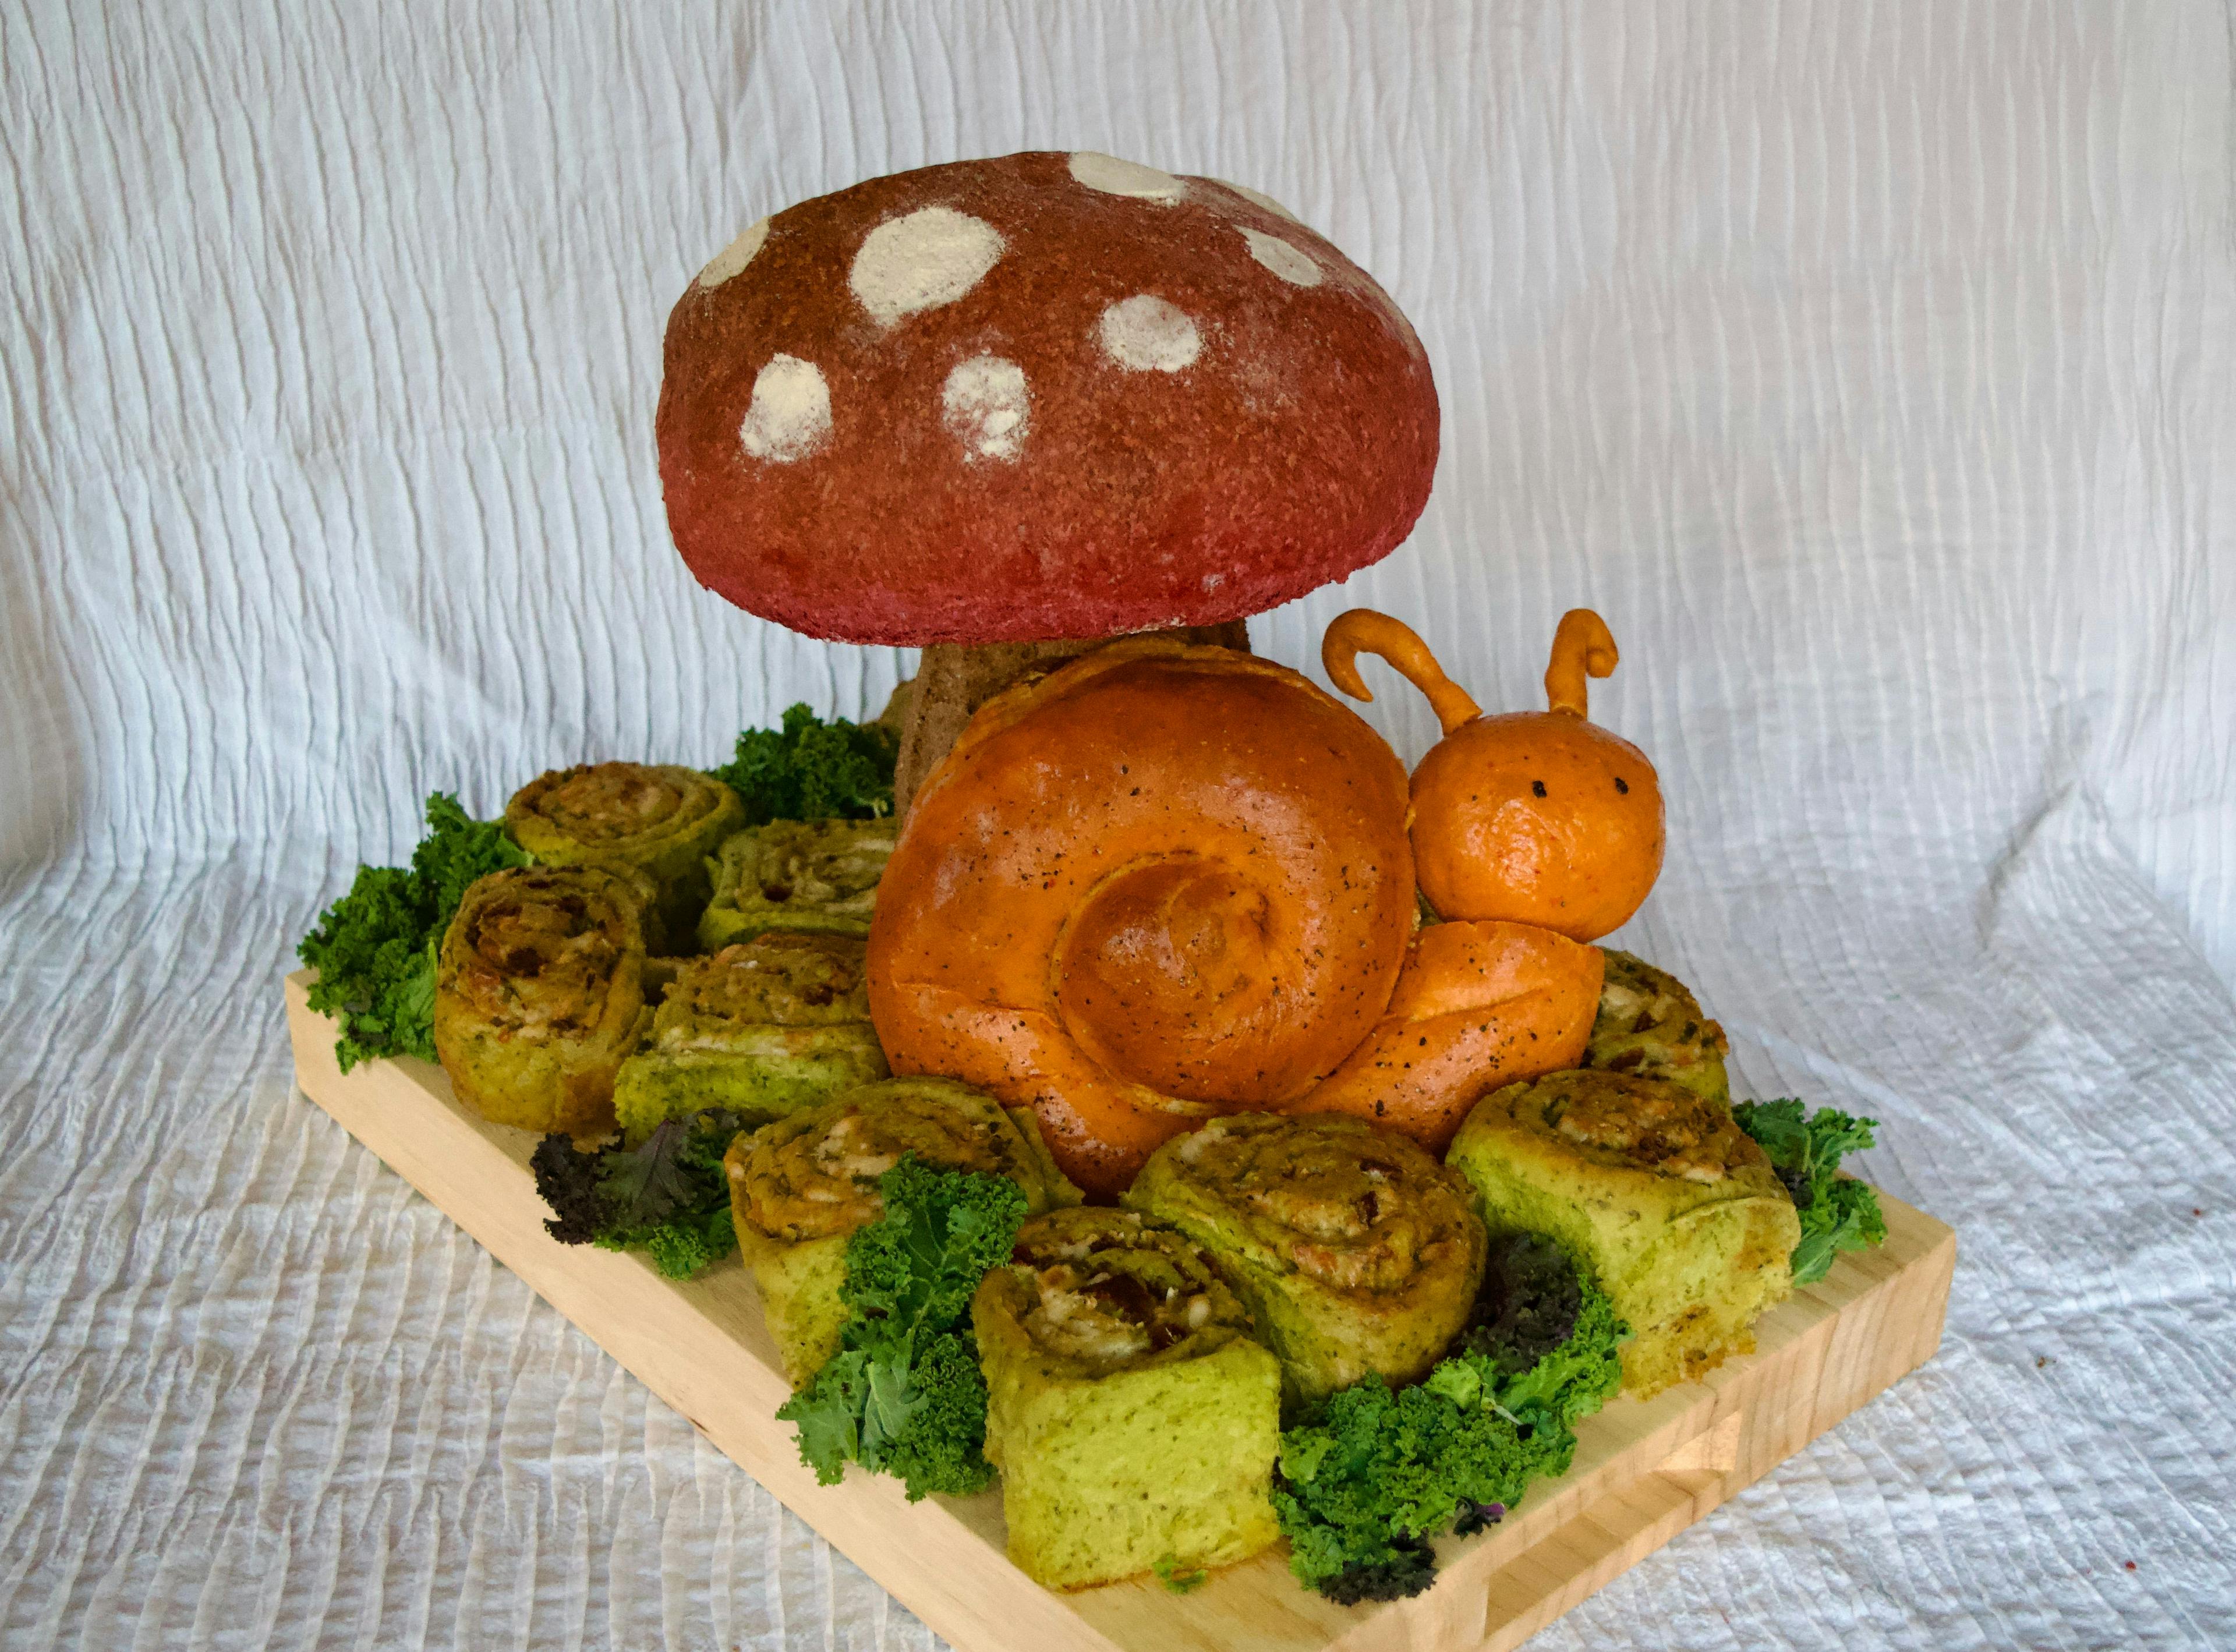 A bread sculpture on a cutting board with an orange bread snail and a red bread mushroom.